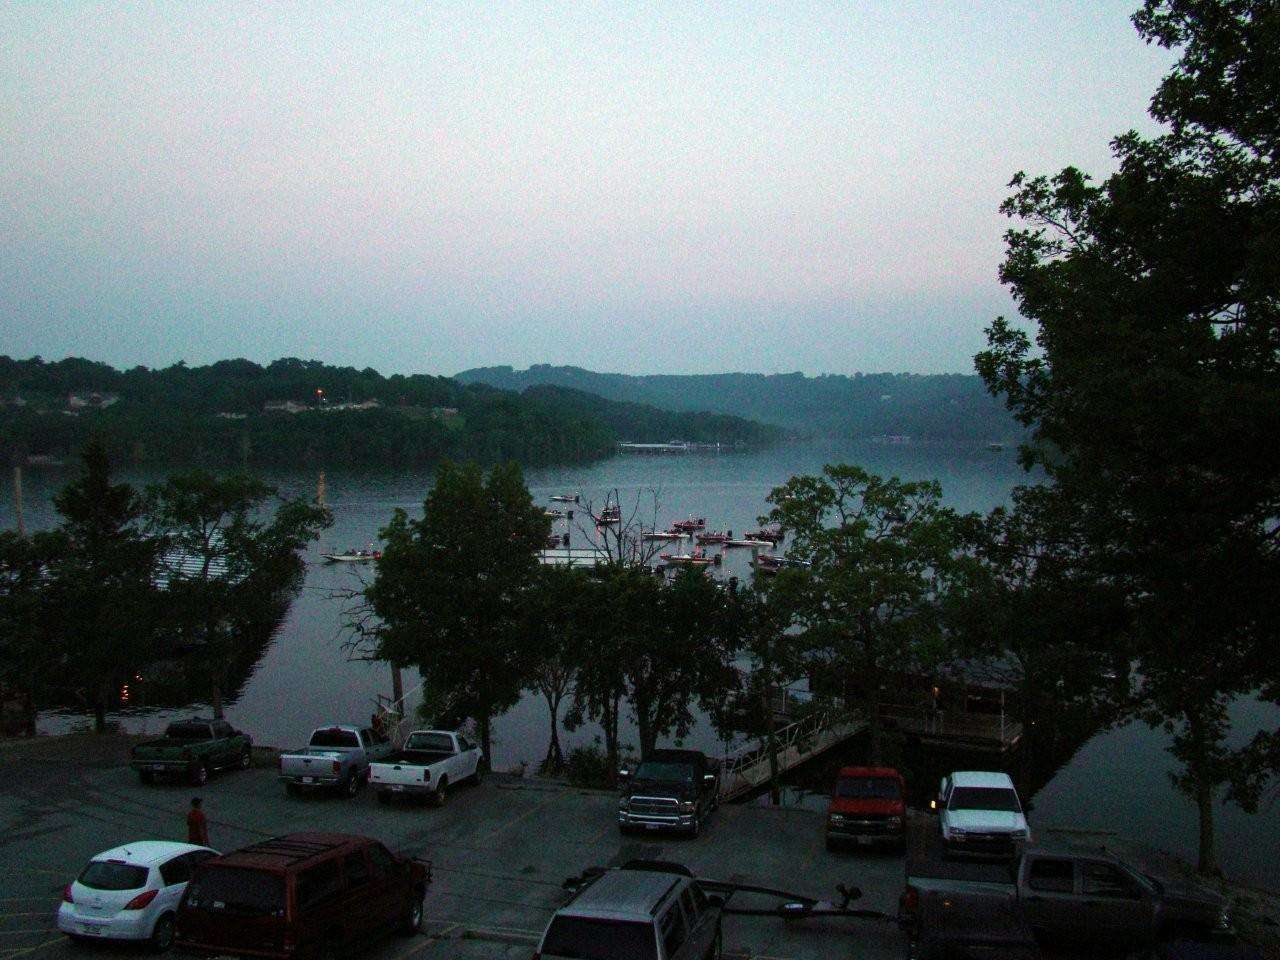 <p>
	 </p>
<p>
	Ahoy's Restaurant provides a panoramic view for takeoff at the 2011 B.A.S.S. Federation Nation Central Divisional presented by Yamaha and Skeeter on Table Rock Lake.</p>
